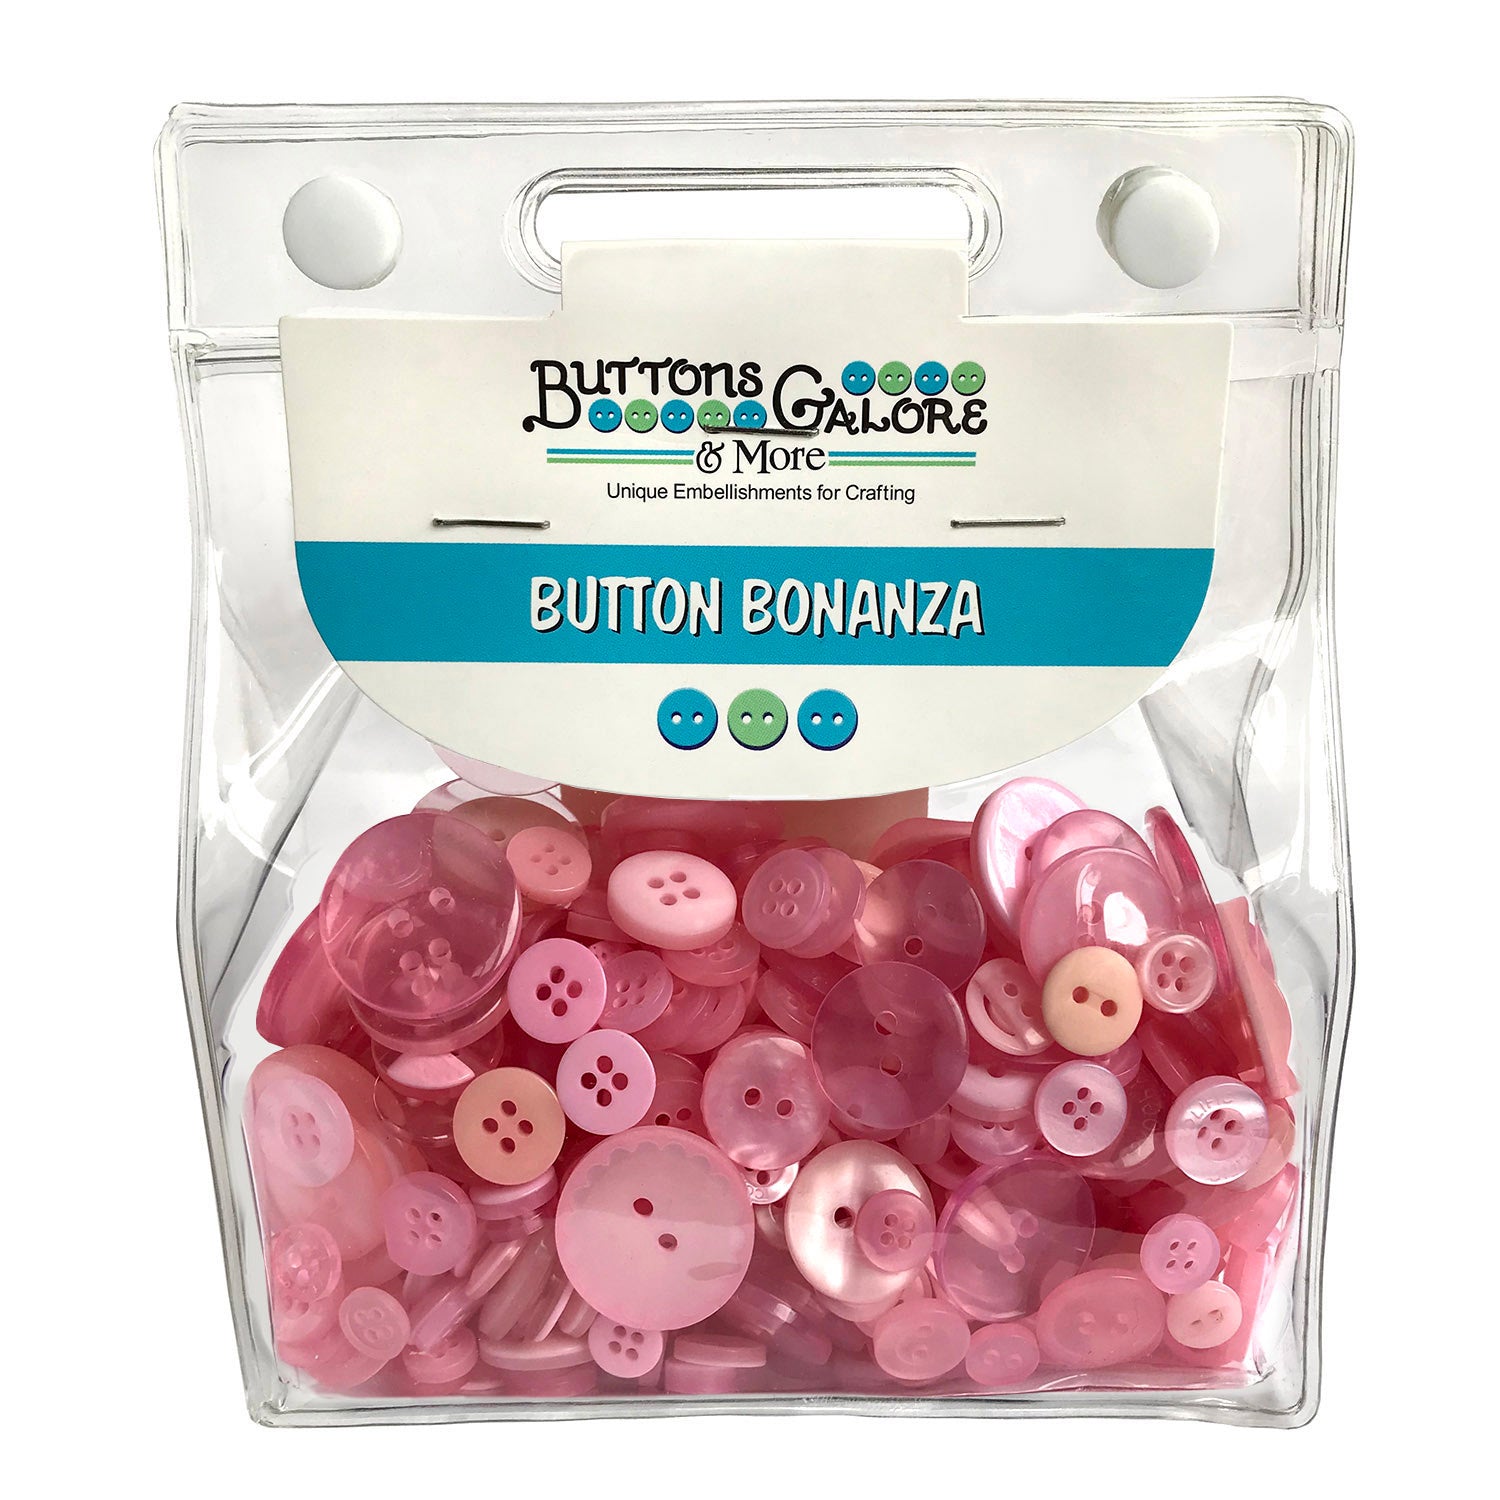 Buttons Galore and More Bulk Buttons - School Days - 100 Buttons